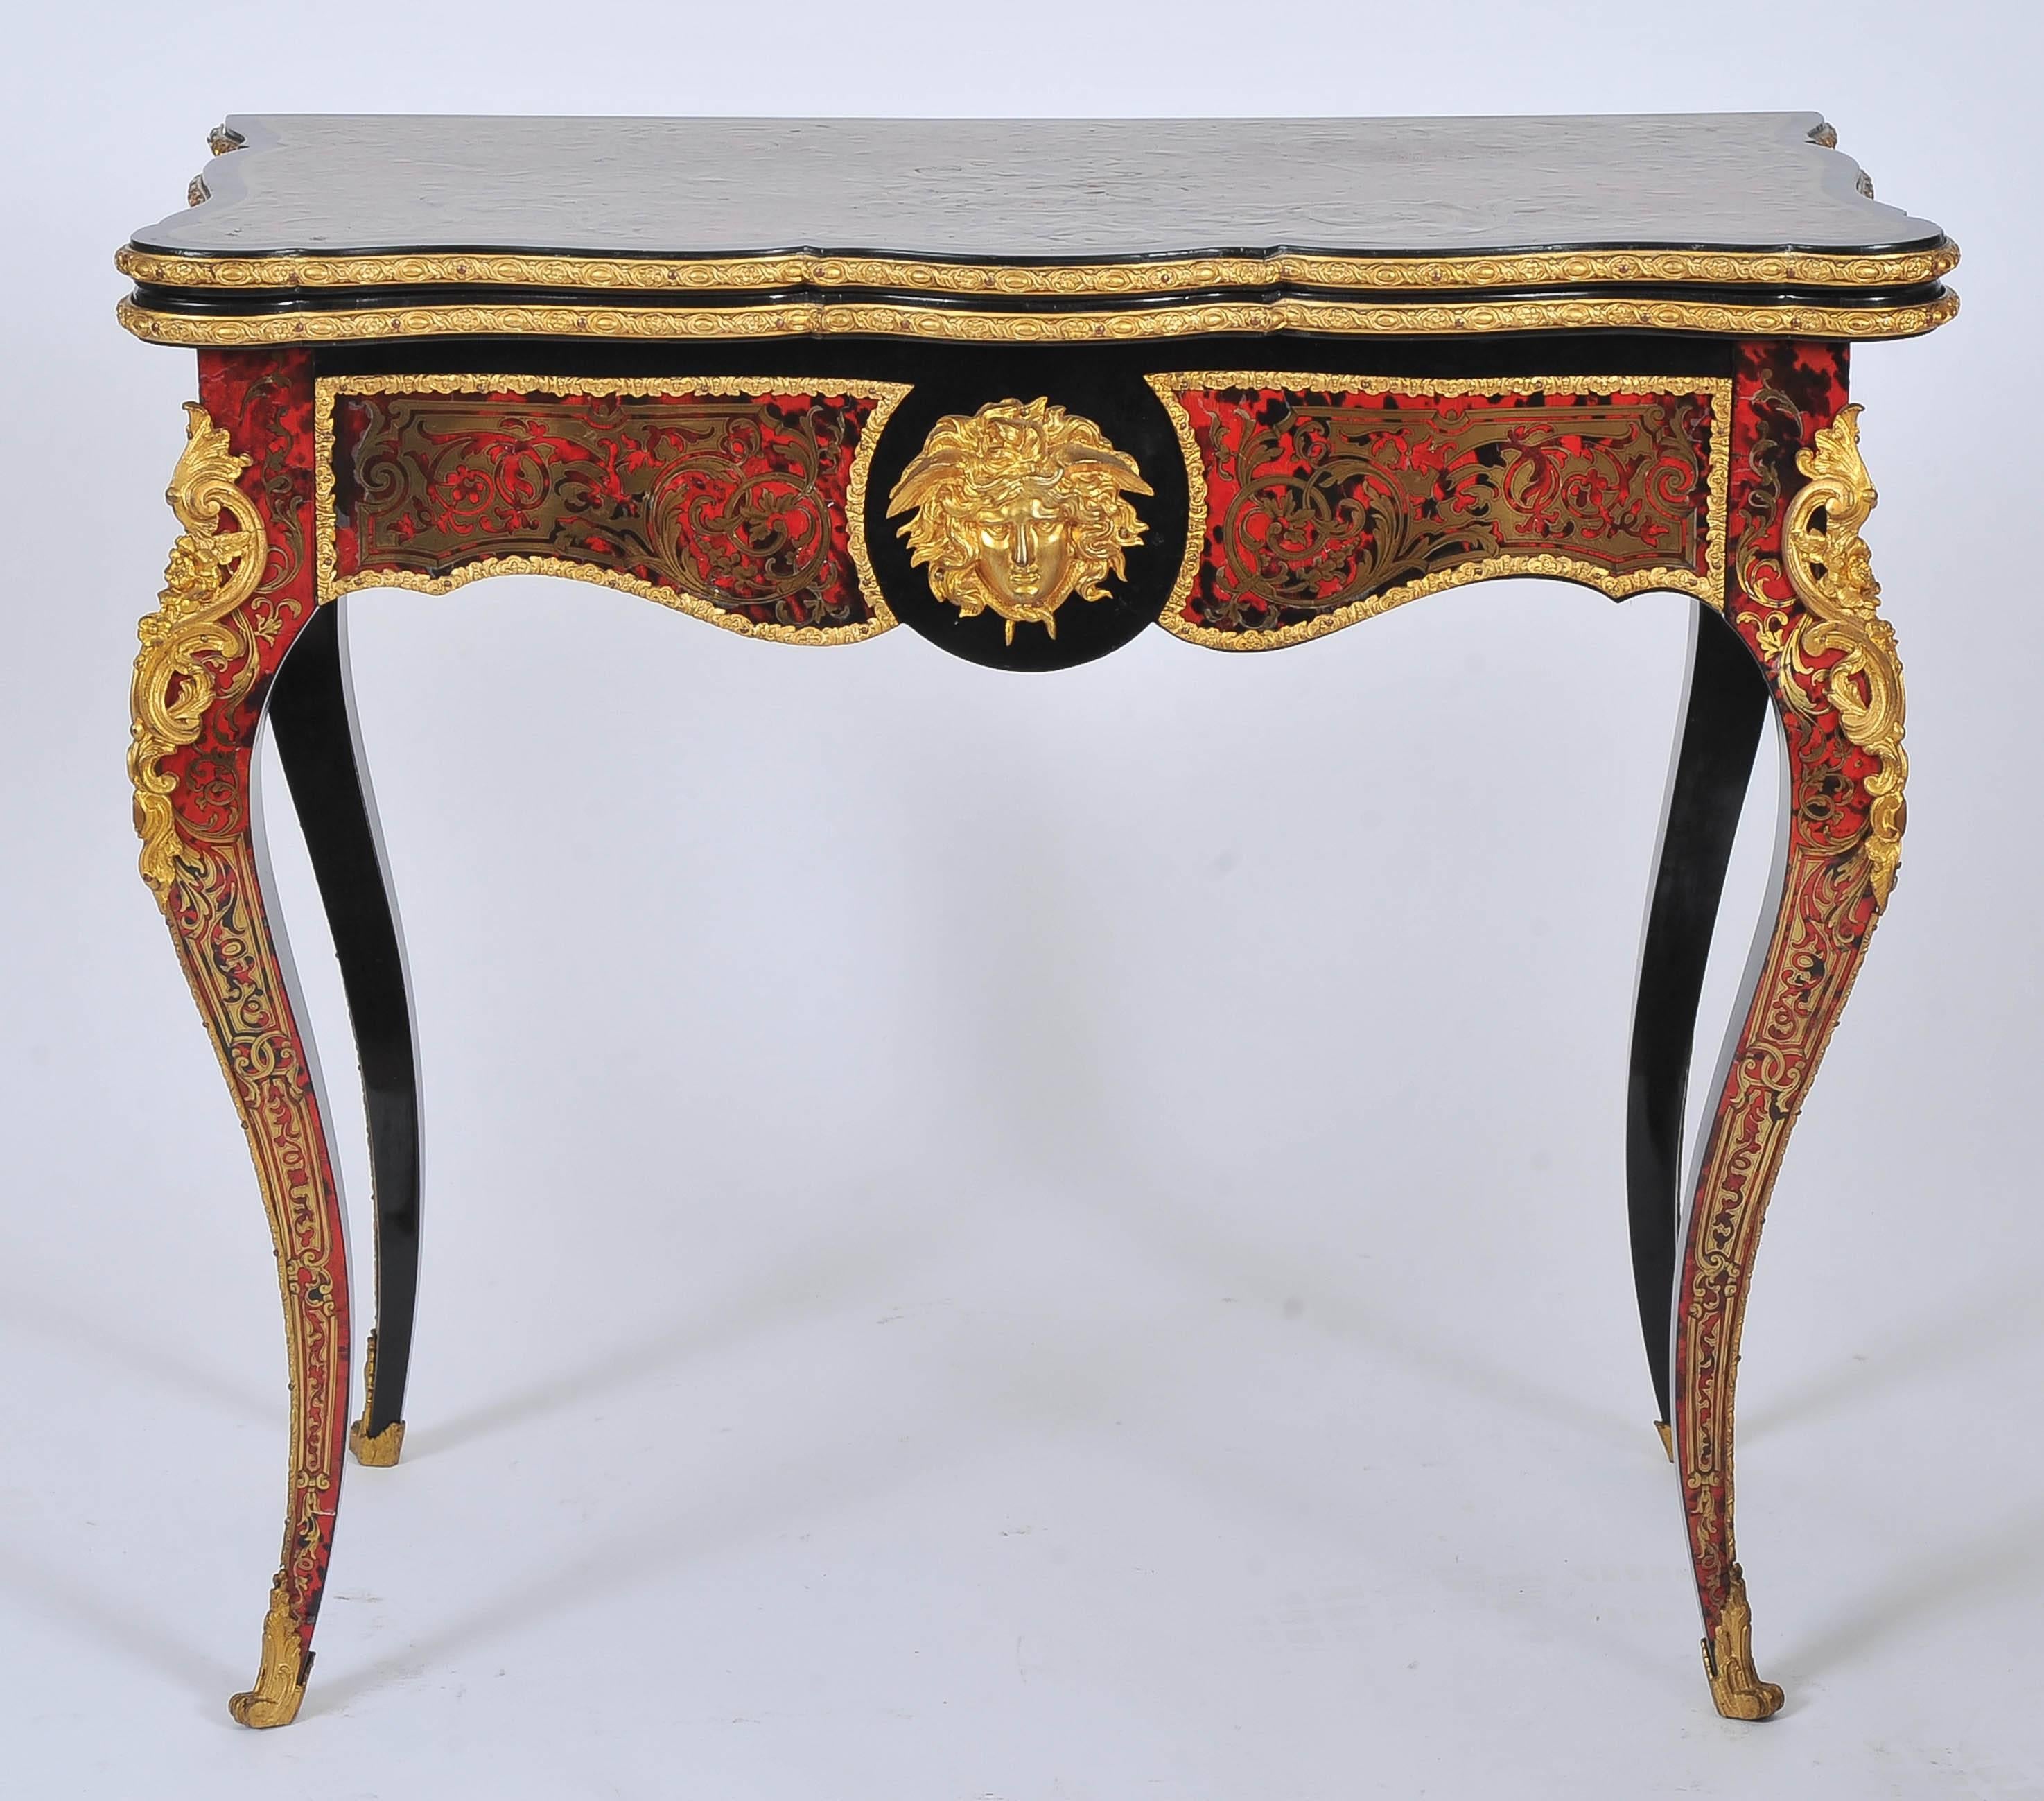 This stunning pair of ornate card tables designed after André-Charles Boulle, a Superior French Cabinet maker. They feature a lavish partie and contra partie design with delicately shaped cabriole legs and sabot feet. The interior has a fitted and